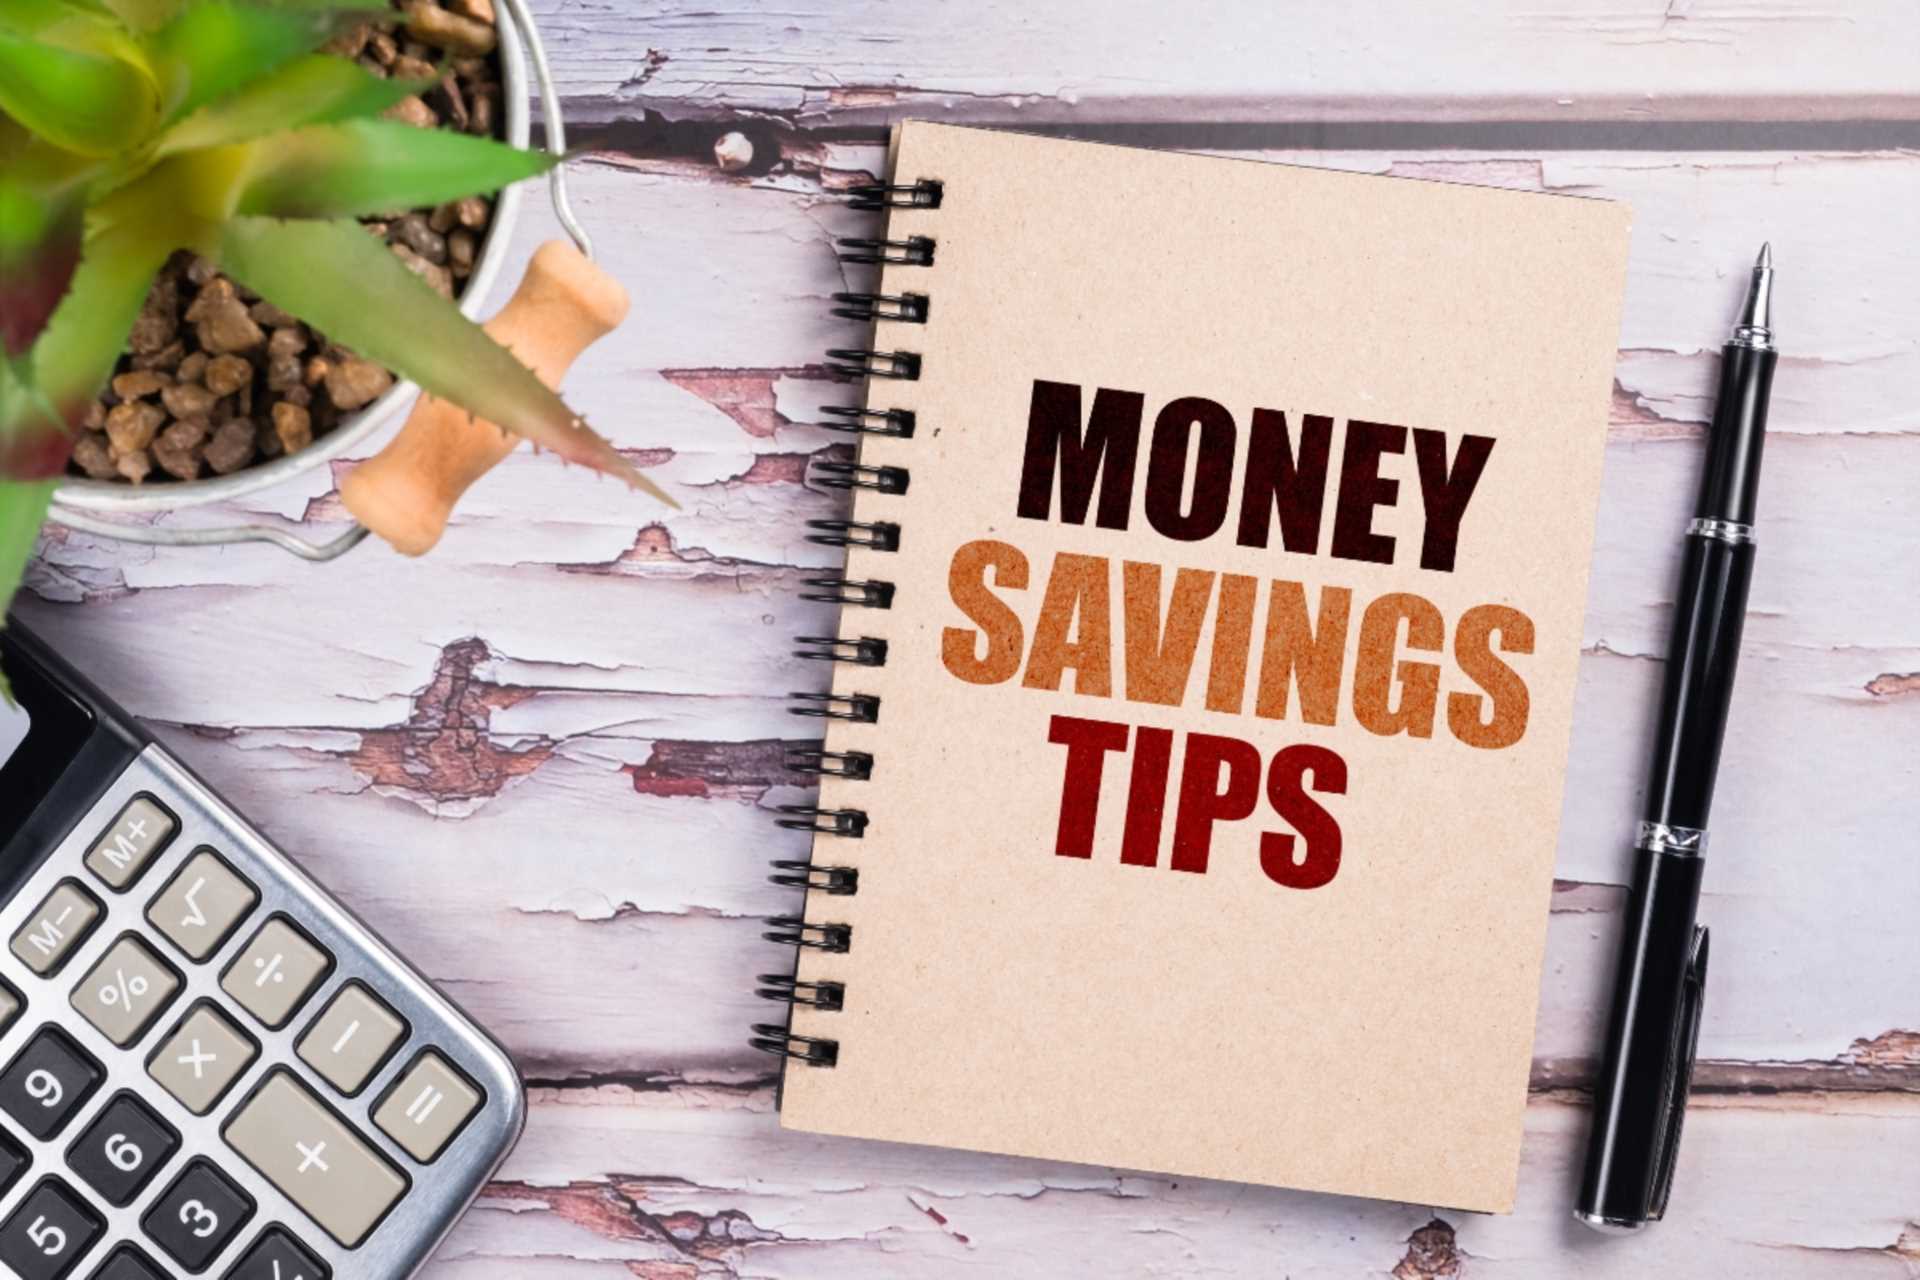 Tenants, here are some money-saving tips for you